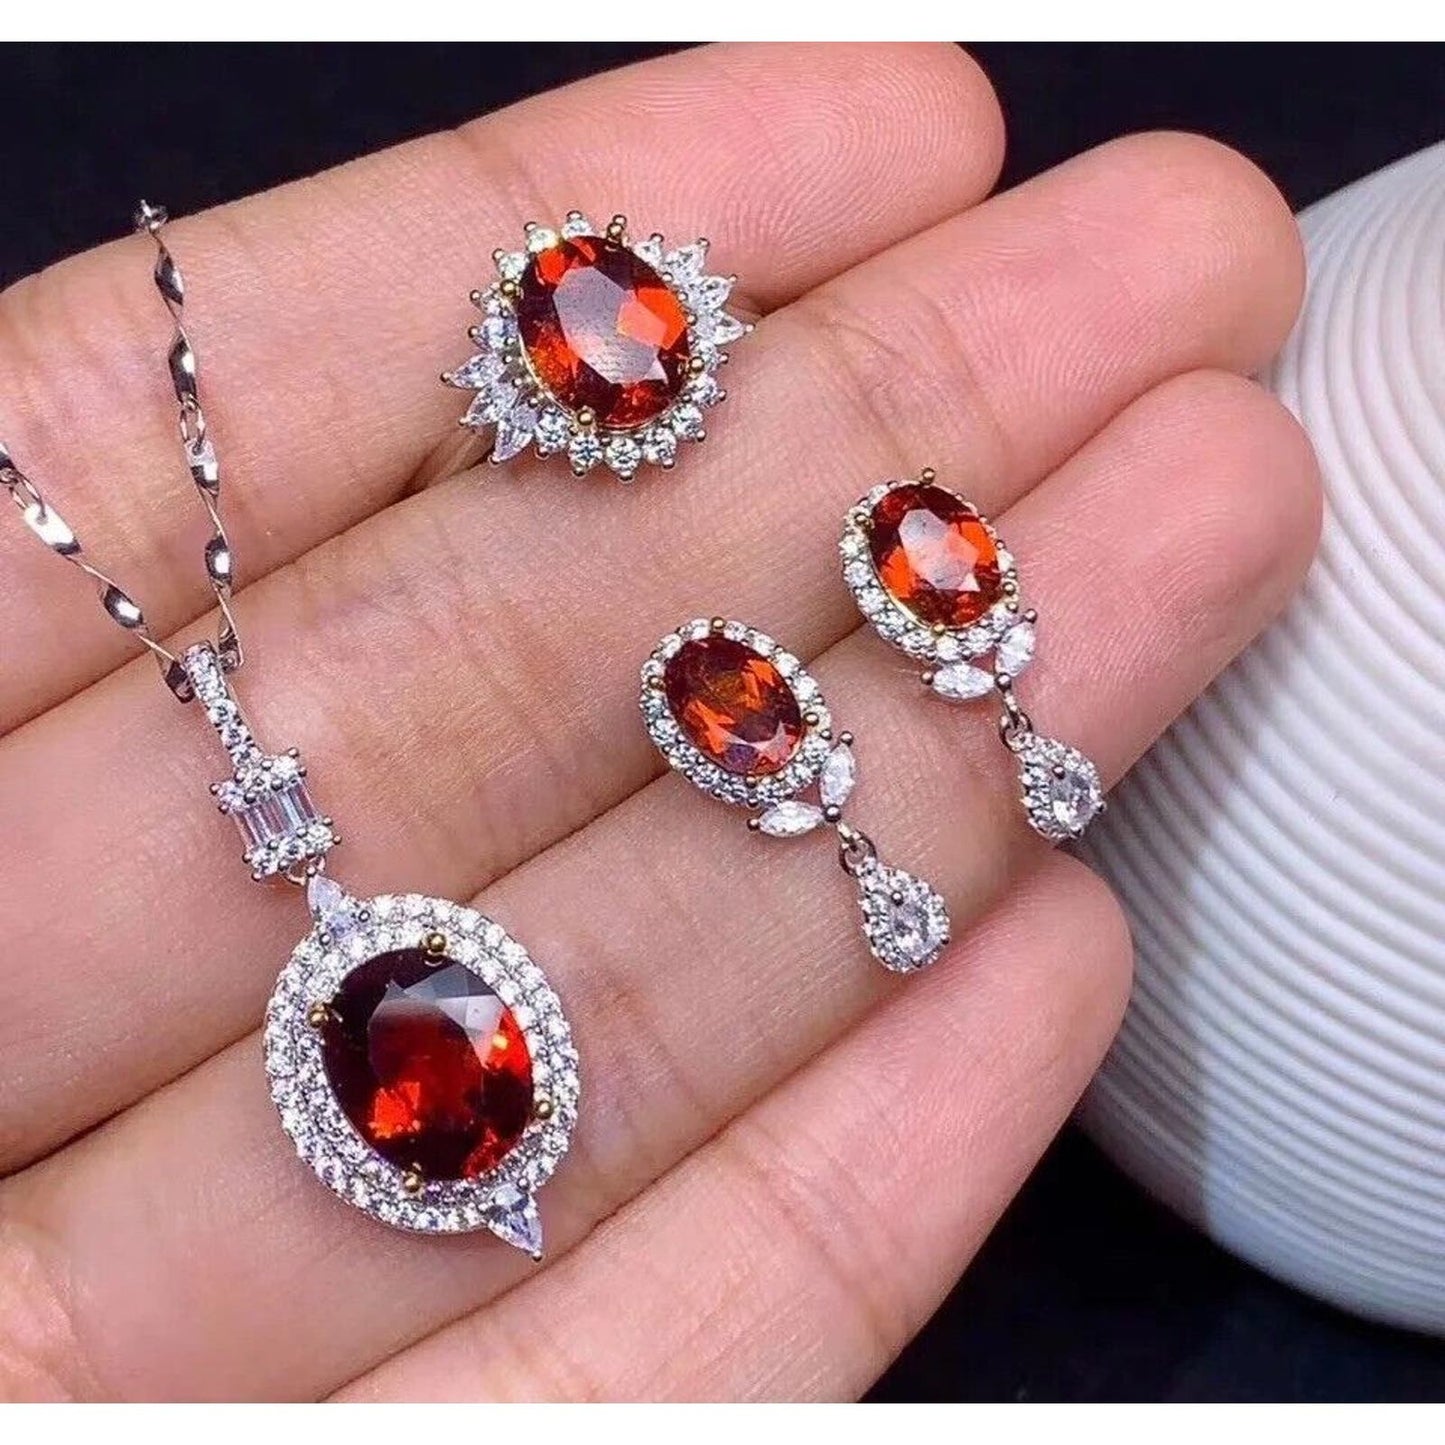 Women's Red Garnet Jewelry Set, Natural Garnet Necklace, Earrings And Pendant